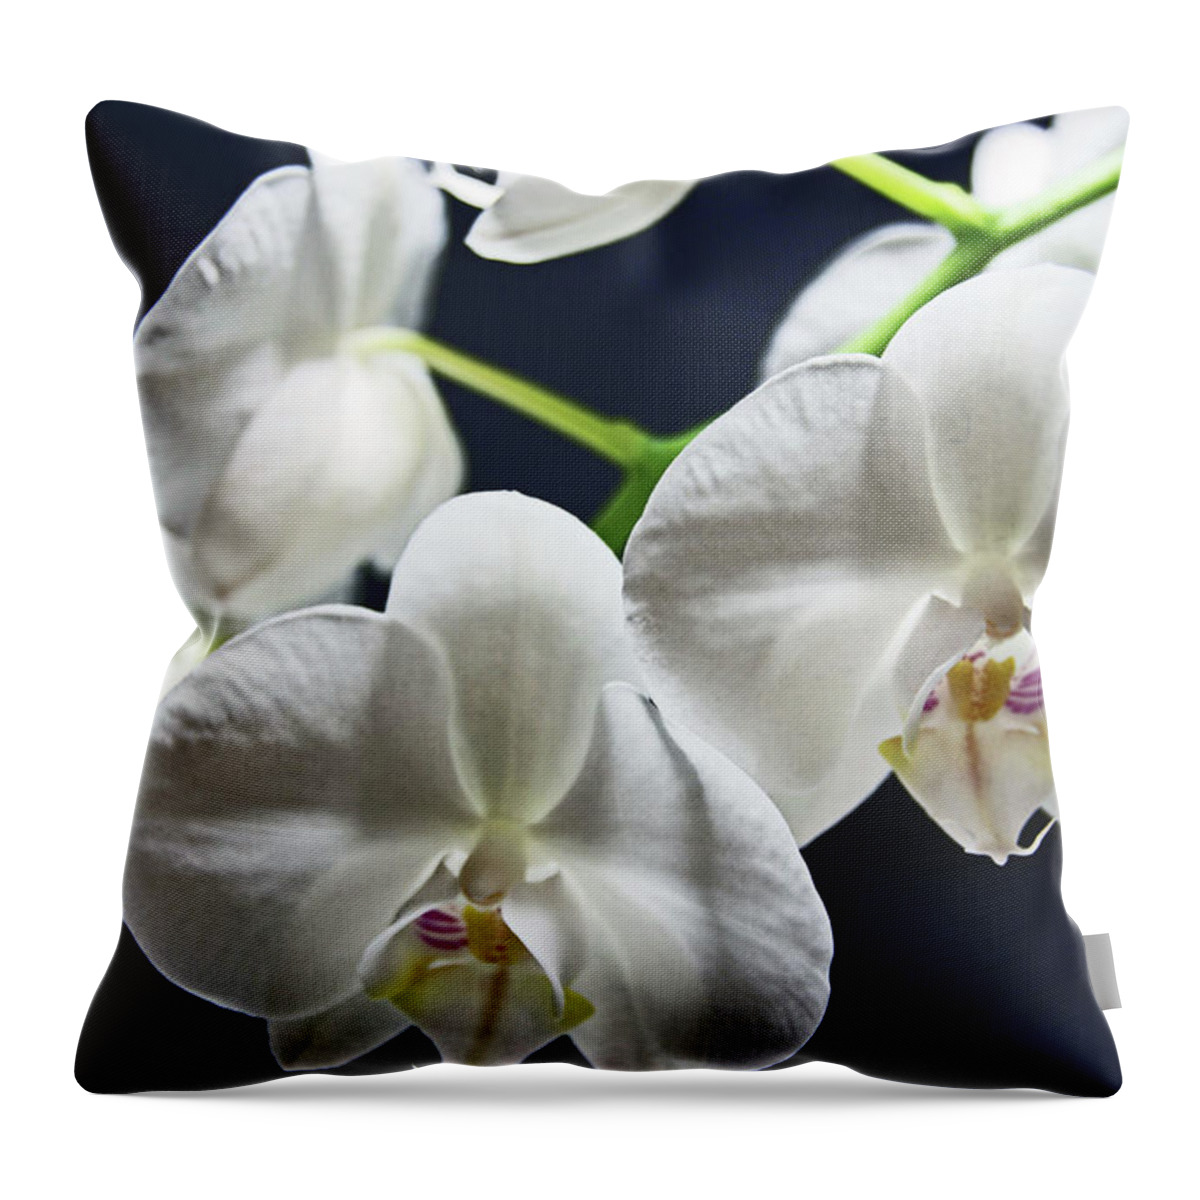 Orchids Throw Pillow featuring the photograph Orchids by Lachlan Main